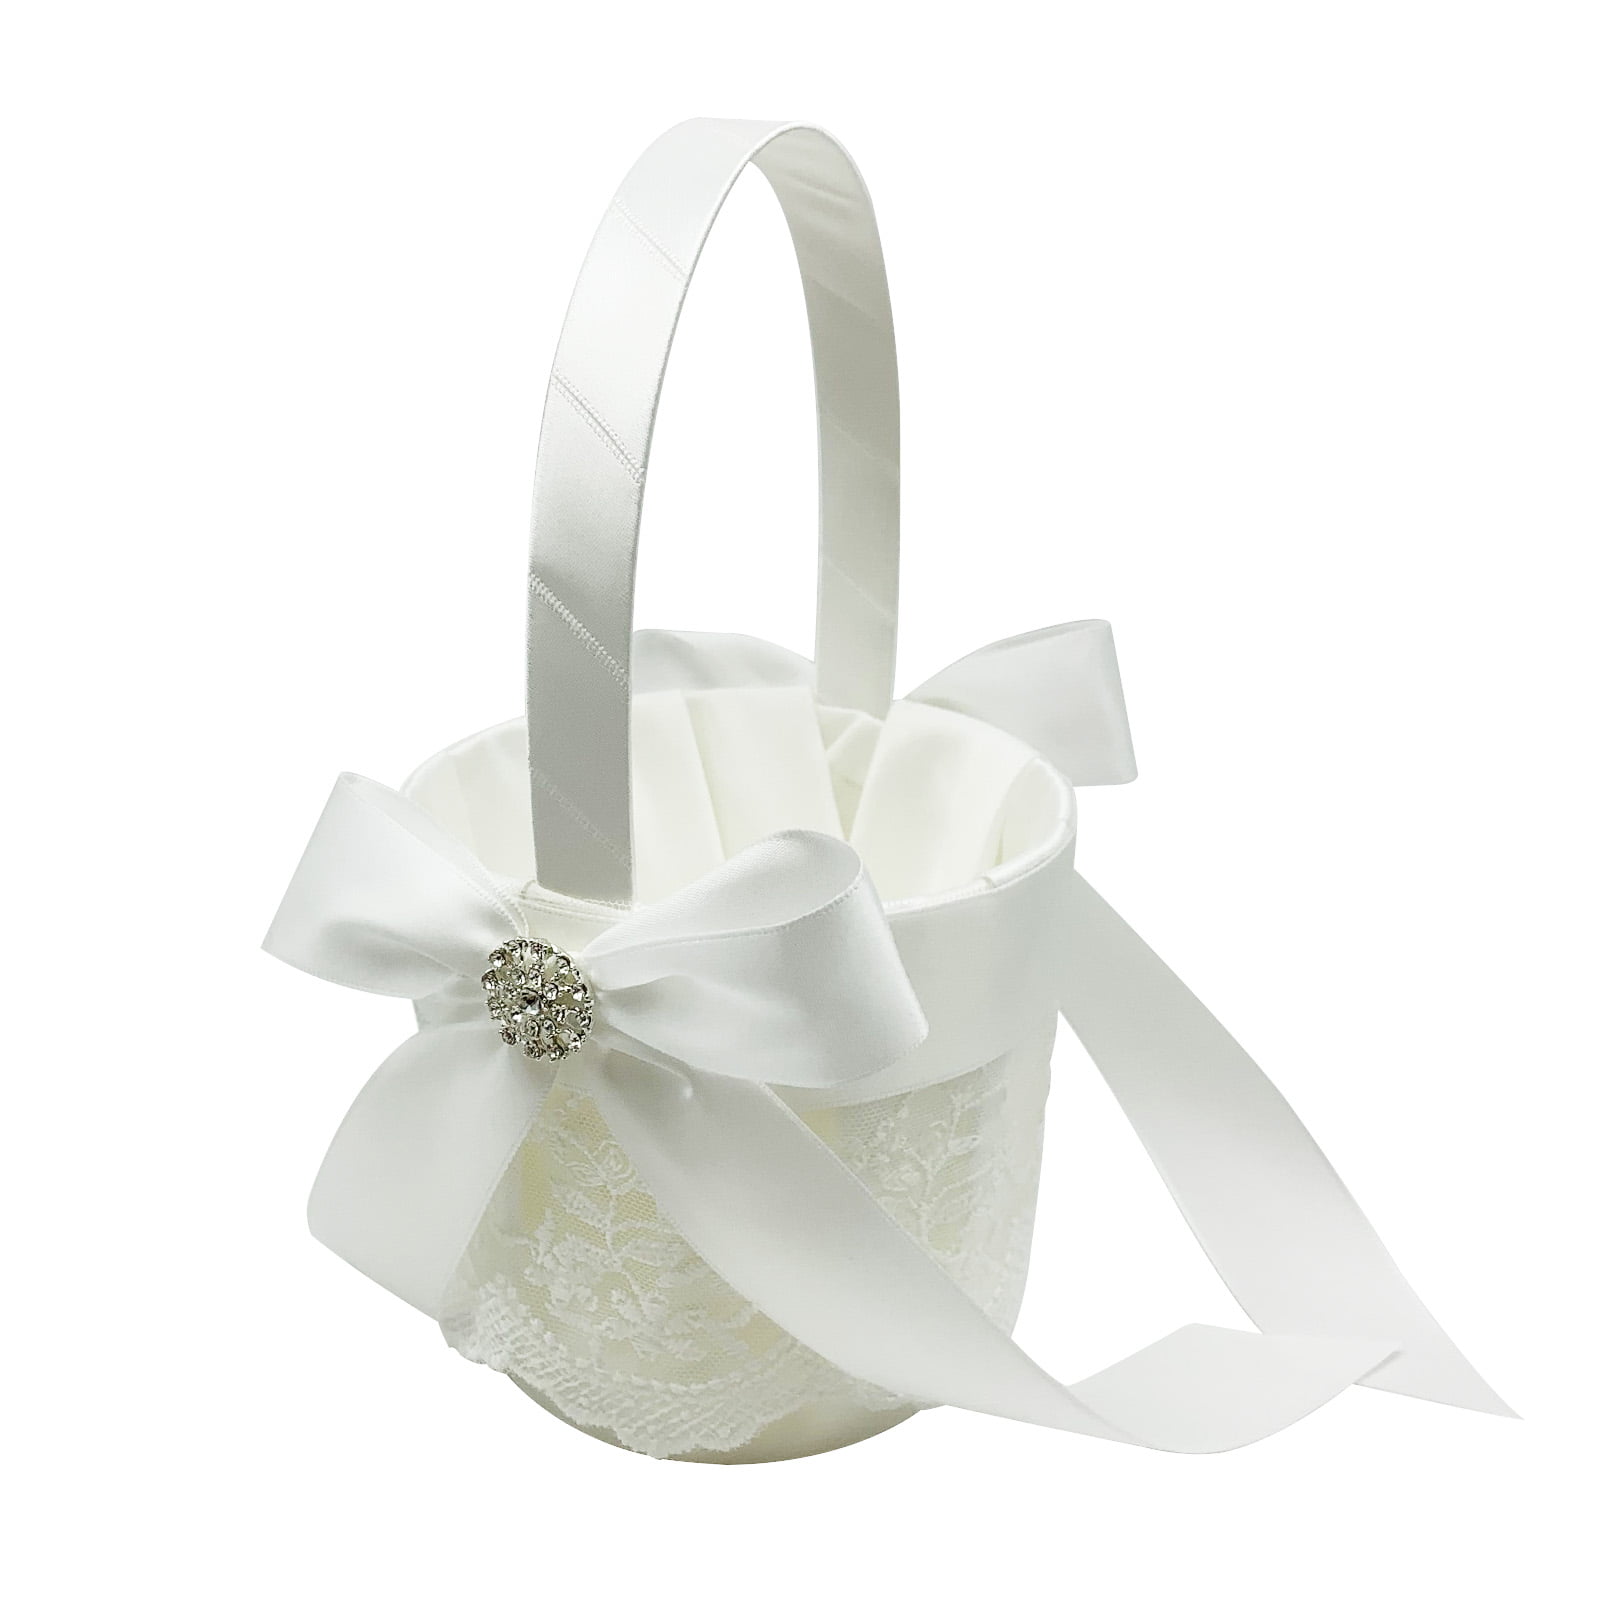 Wedding Flower Basket Ceremony Party Decor Petyoung Romantic Wedding Flower Girl Basket with Bowknot White